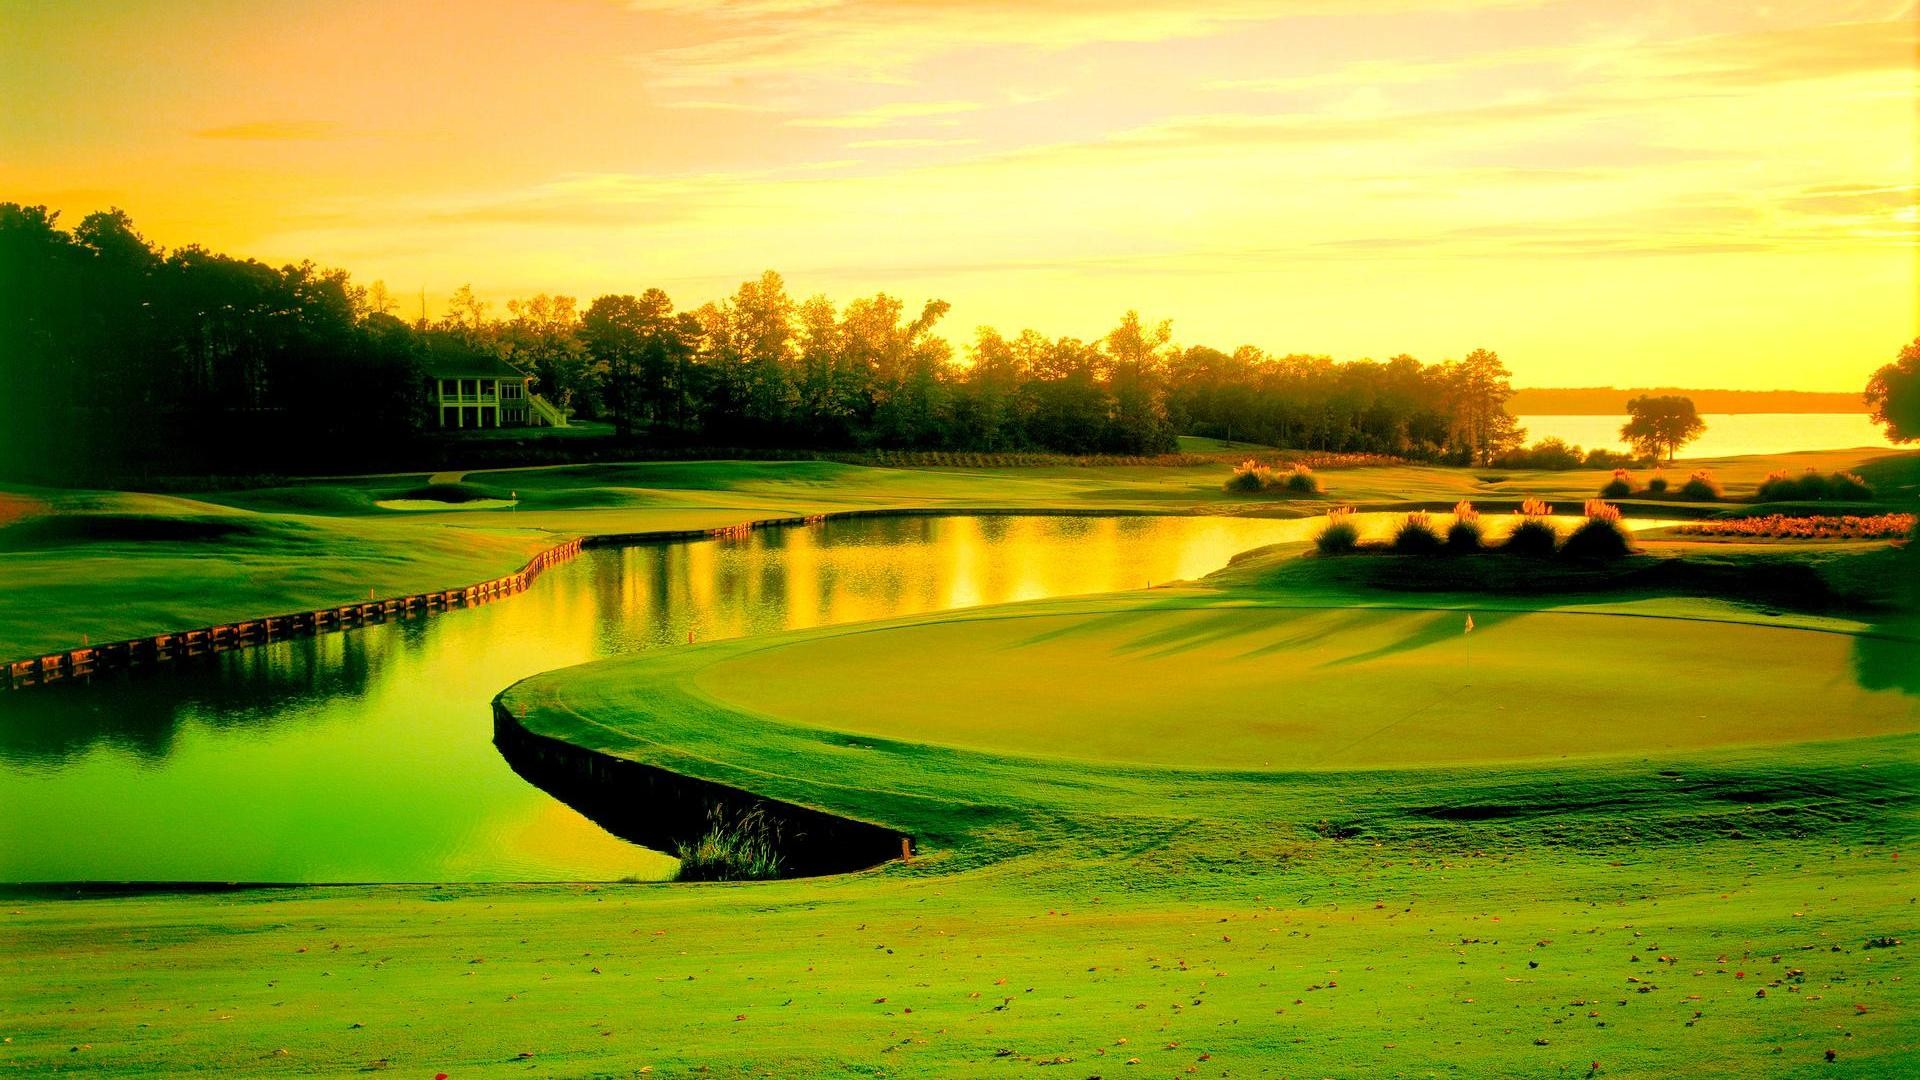 1920x1080 Golf course - (#156278) - High Quality and Resolution Wallpapers on .